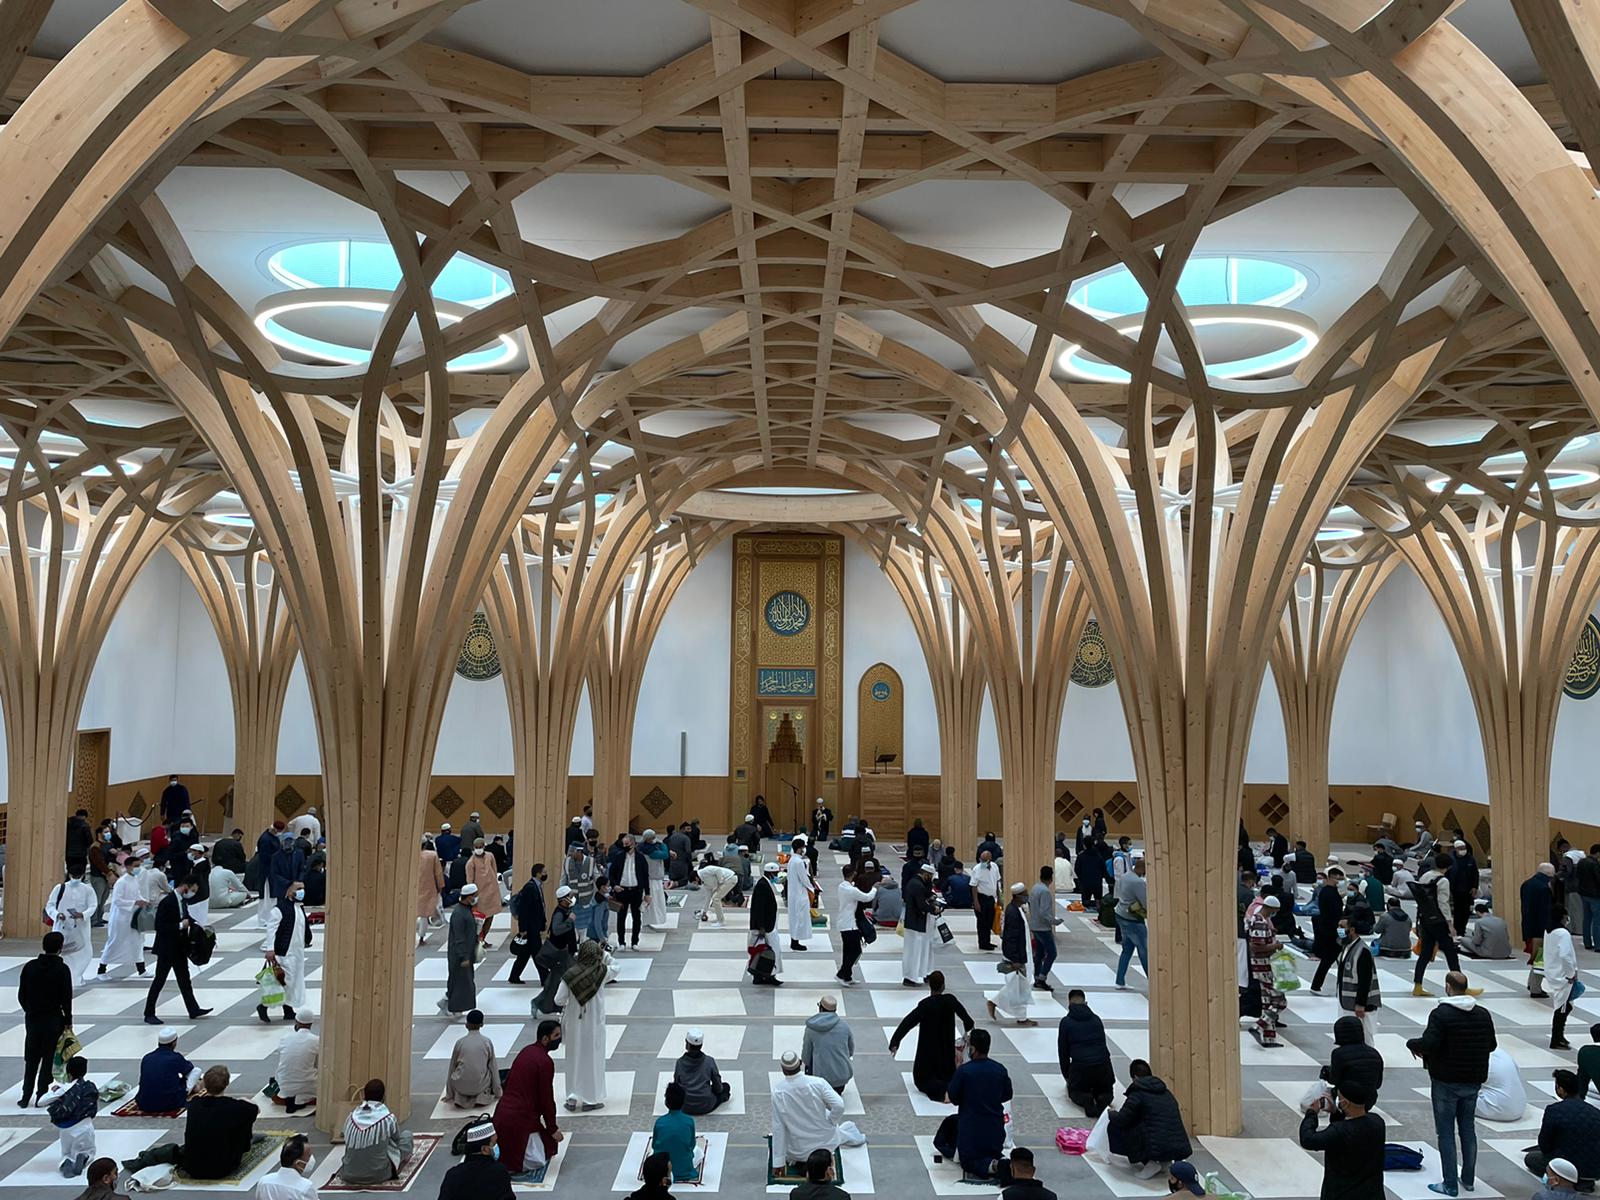 Extravagant timber pillars inside a mosque, with people praying